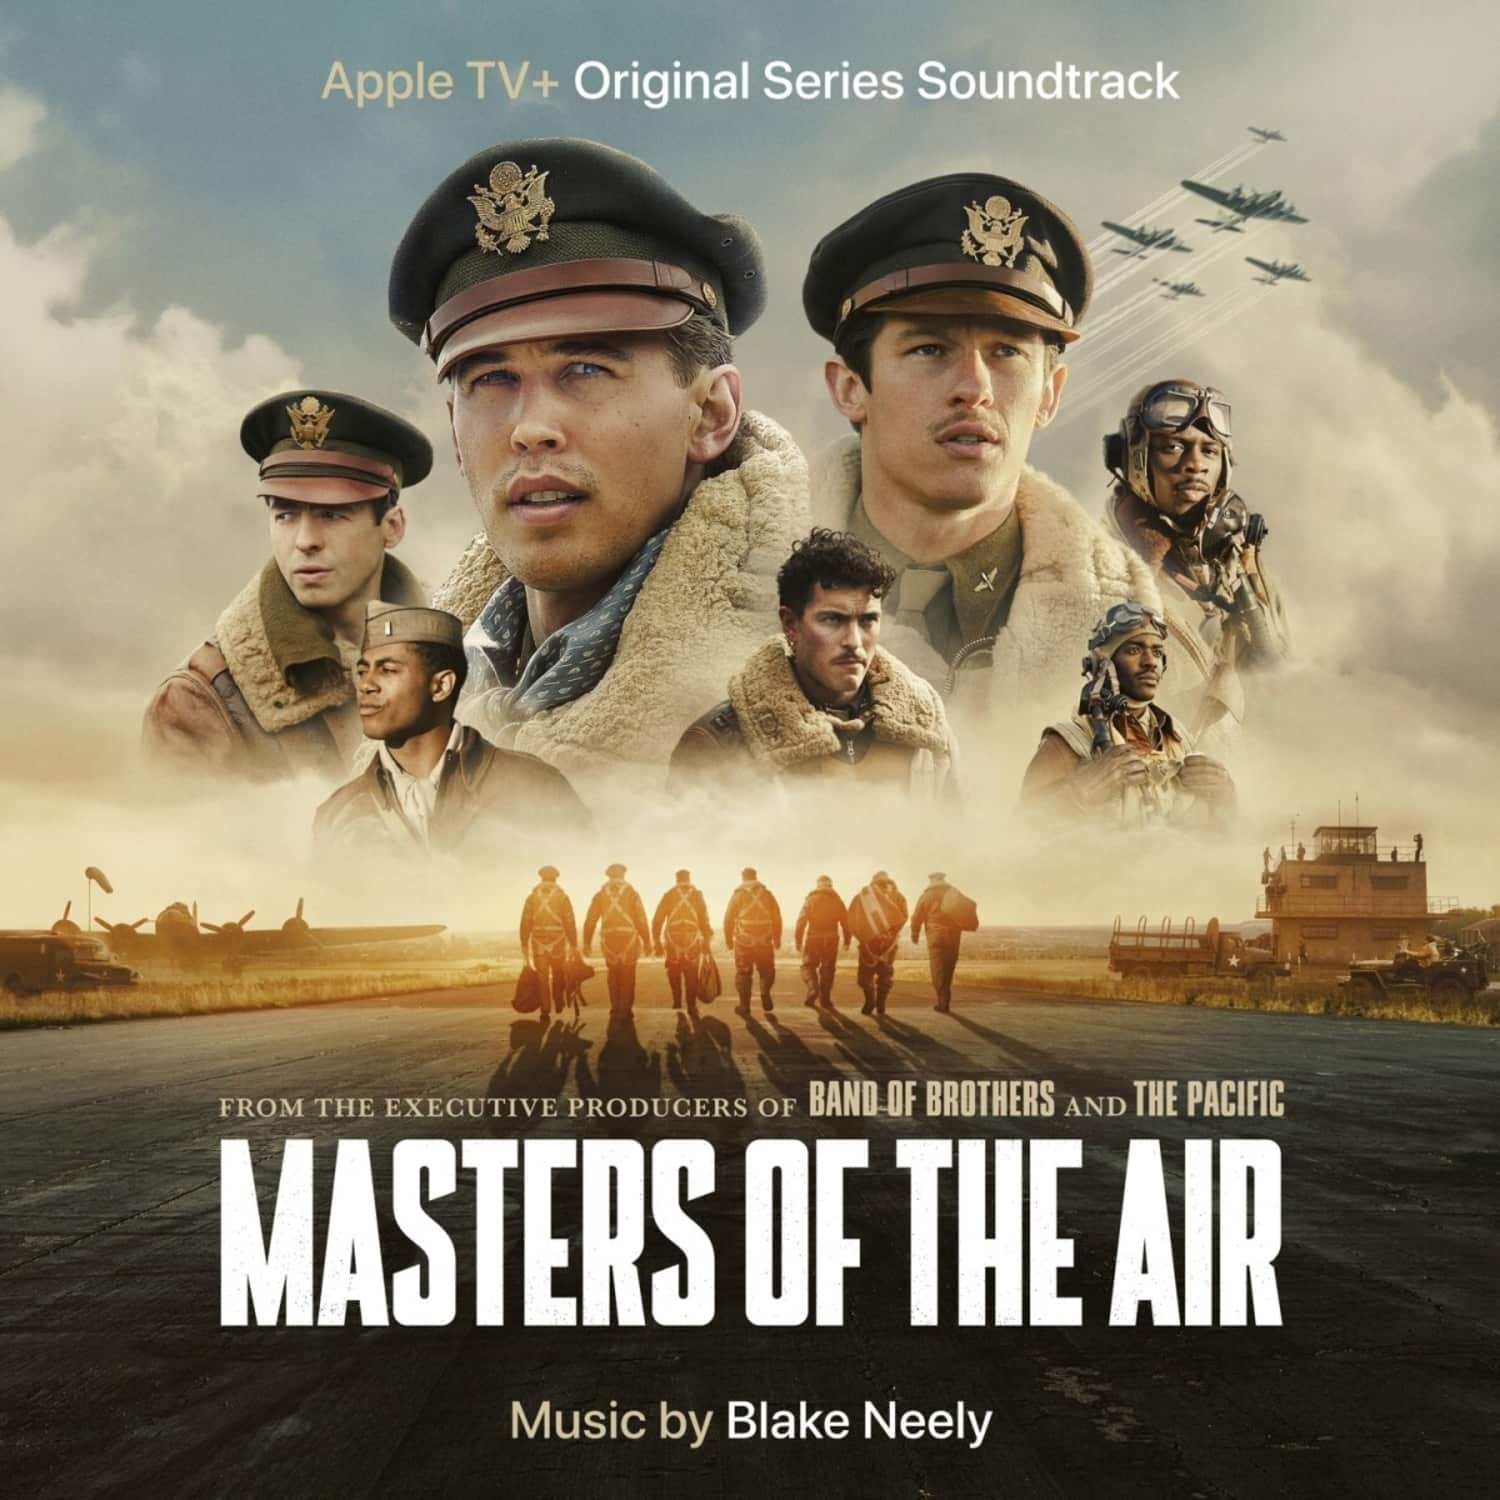 OST / Blake Neely - MASTERS OF THE AIR 